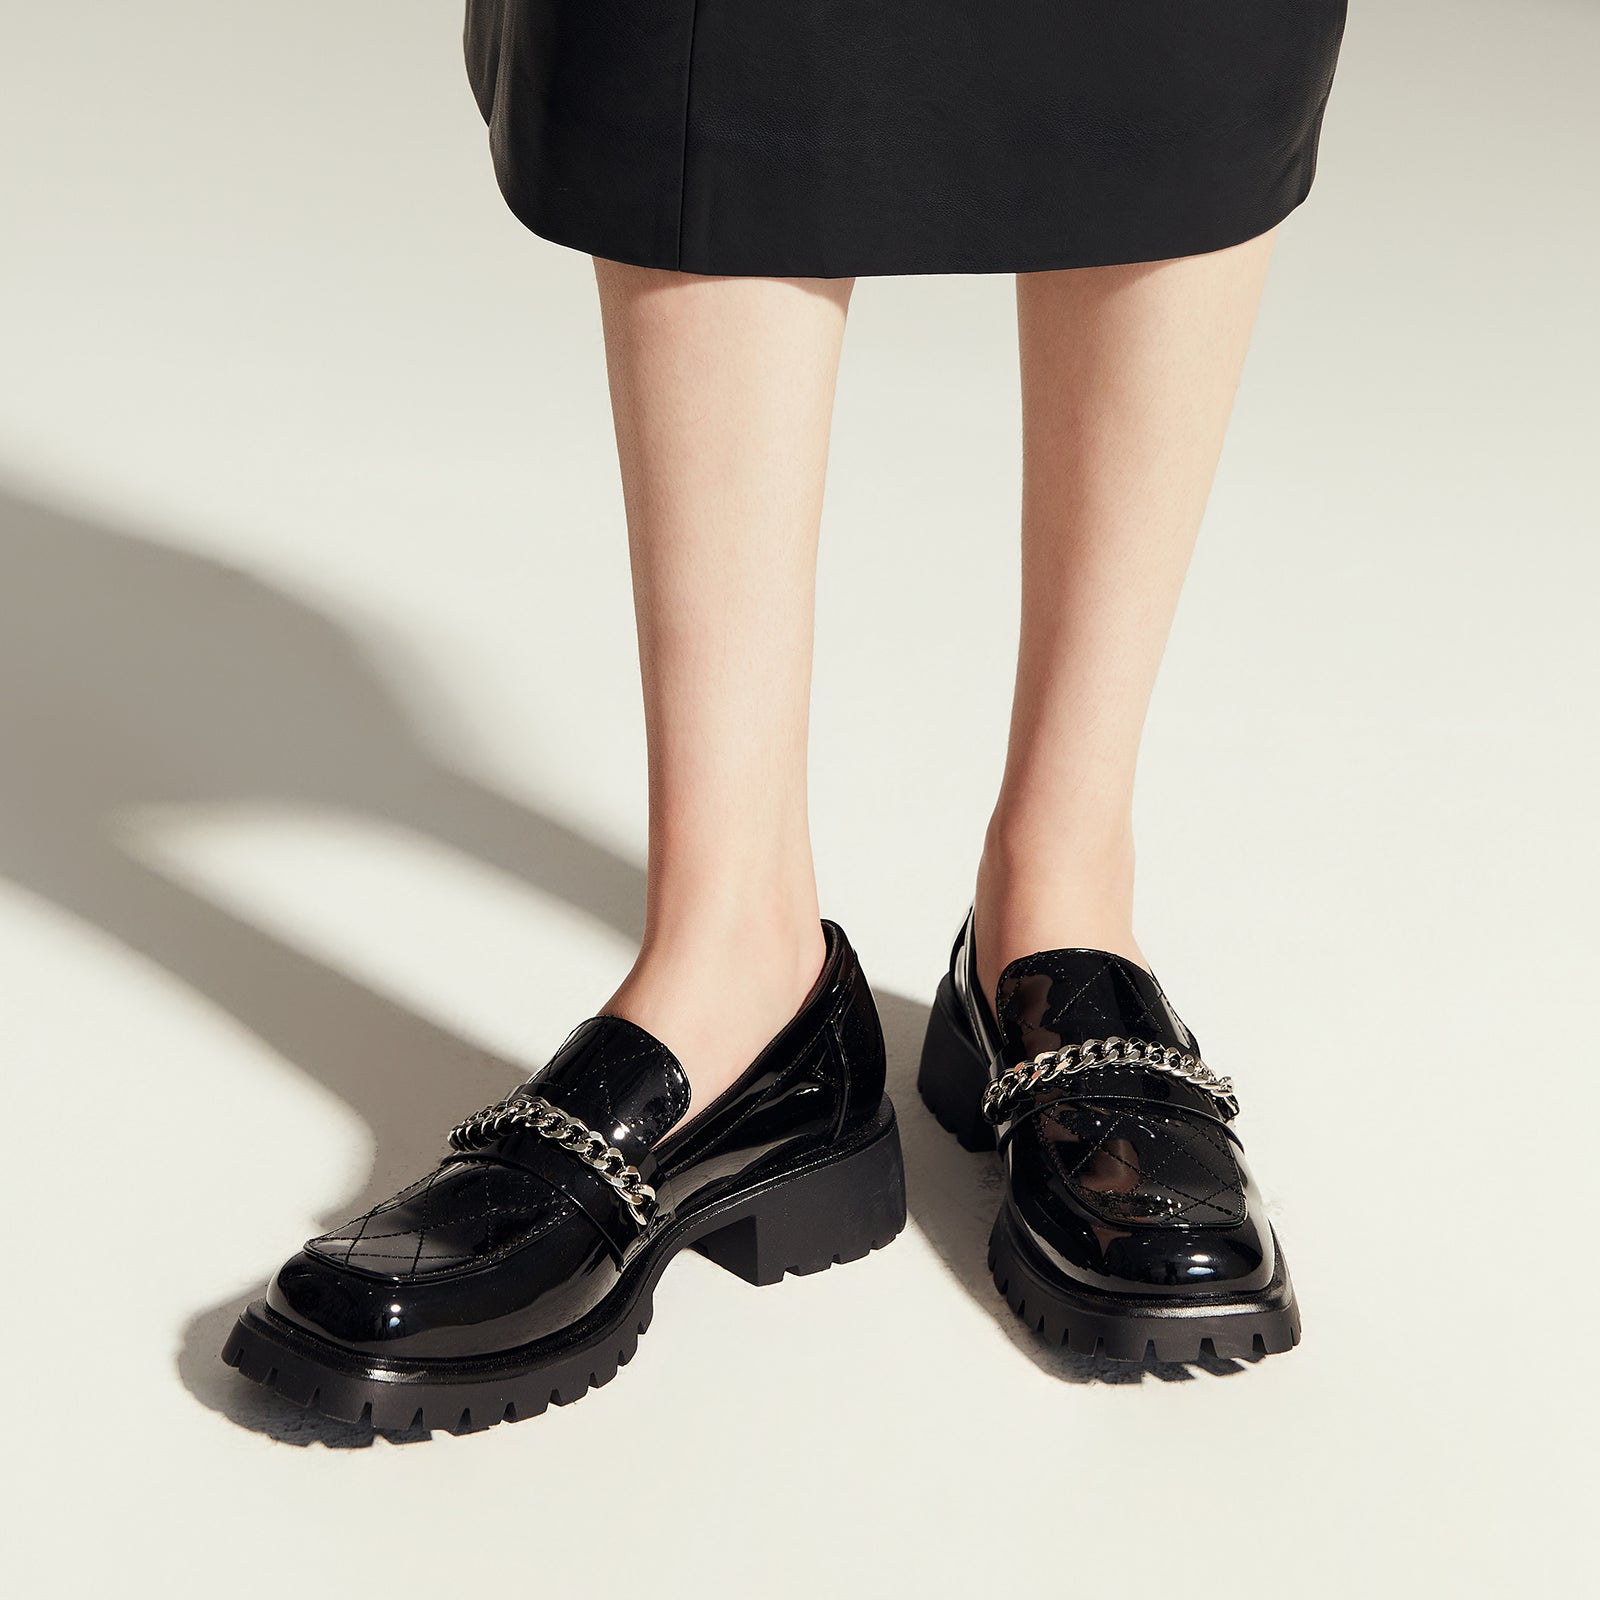  Metal Chain Platform Loafers in Black, a timeless and versatile option for everyday elegance